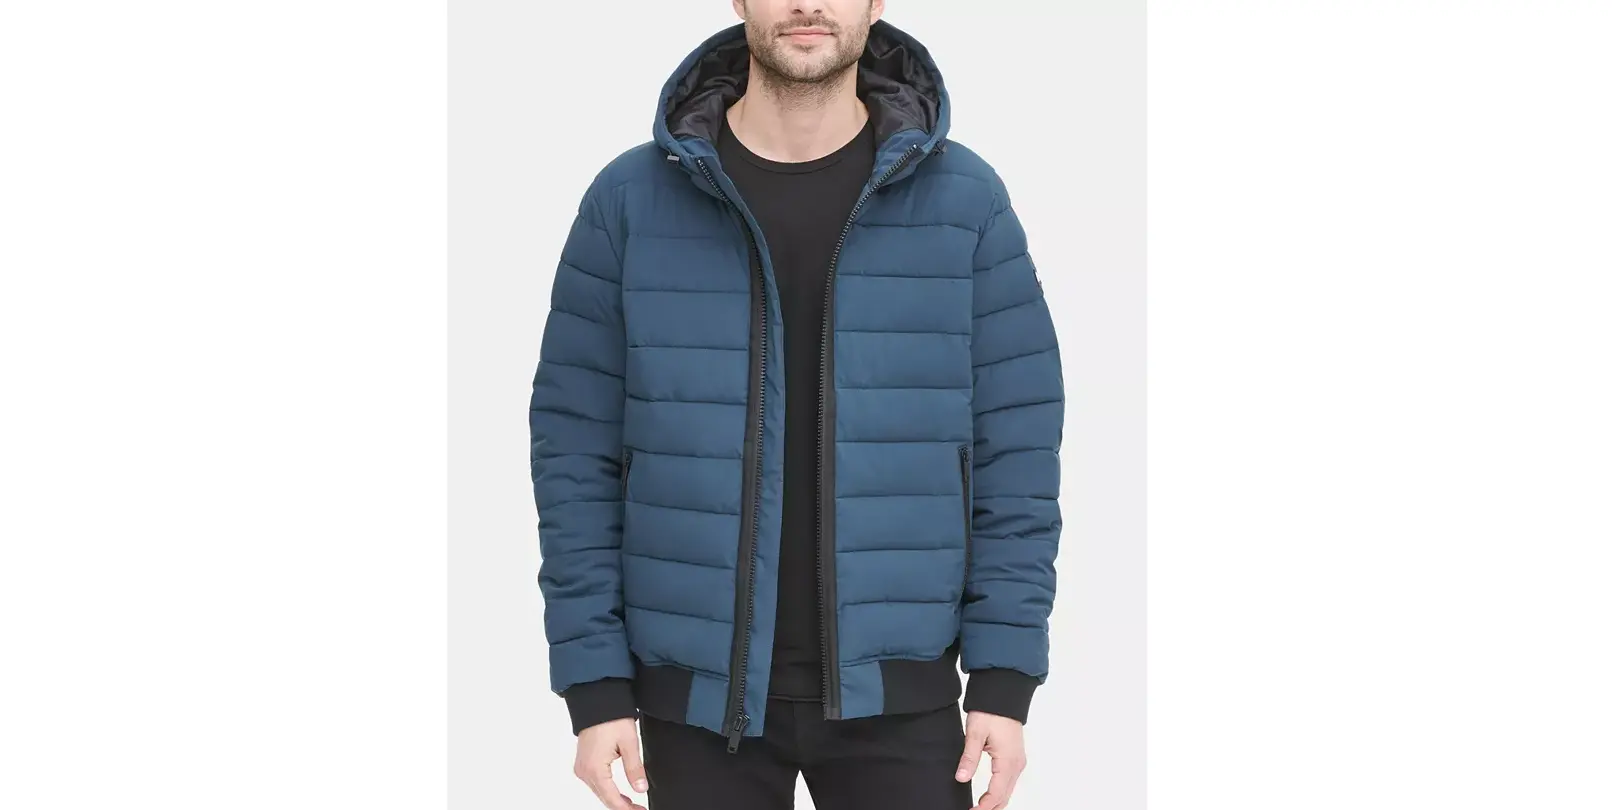 Macy - DKNY Men’s Quilted Hooded Bomber Jacket